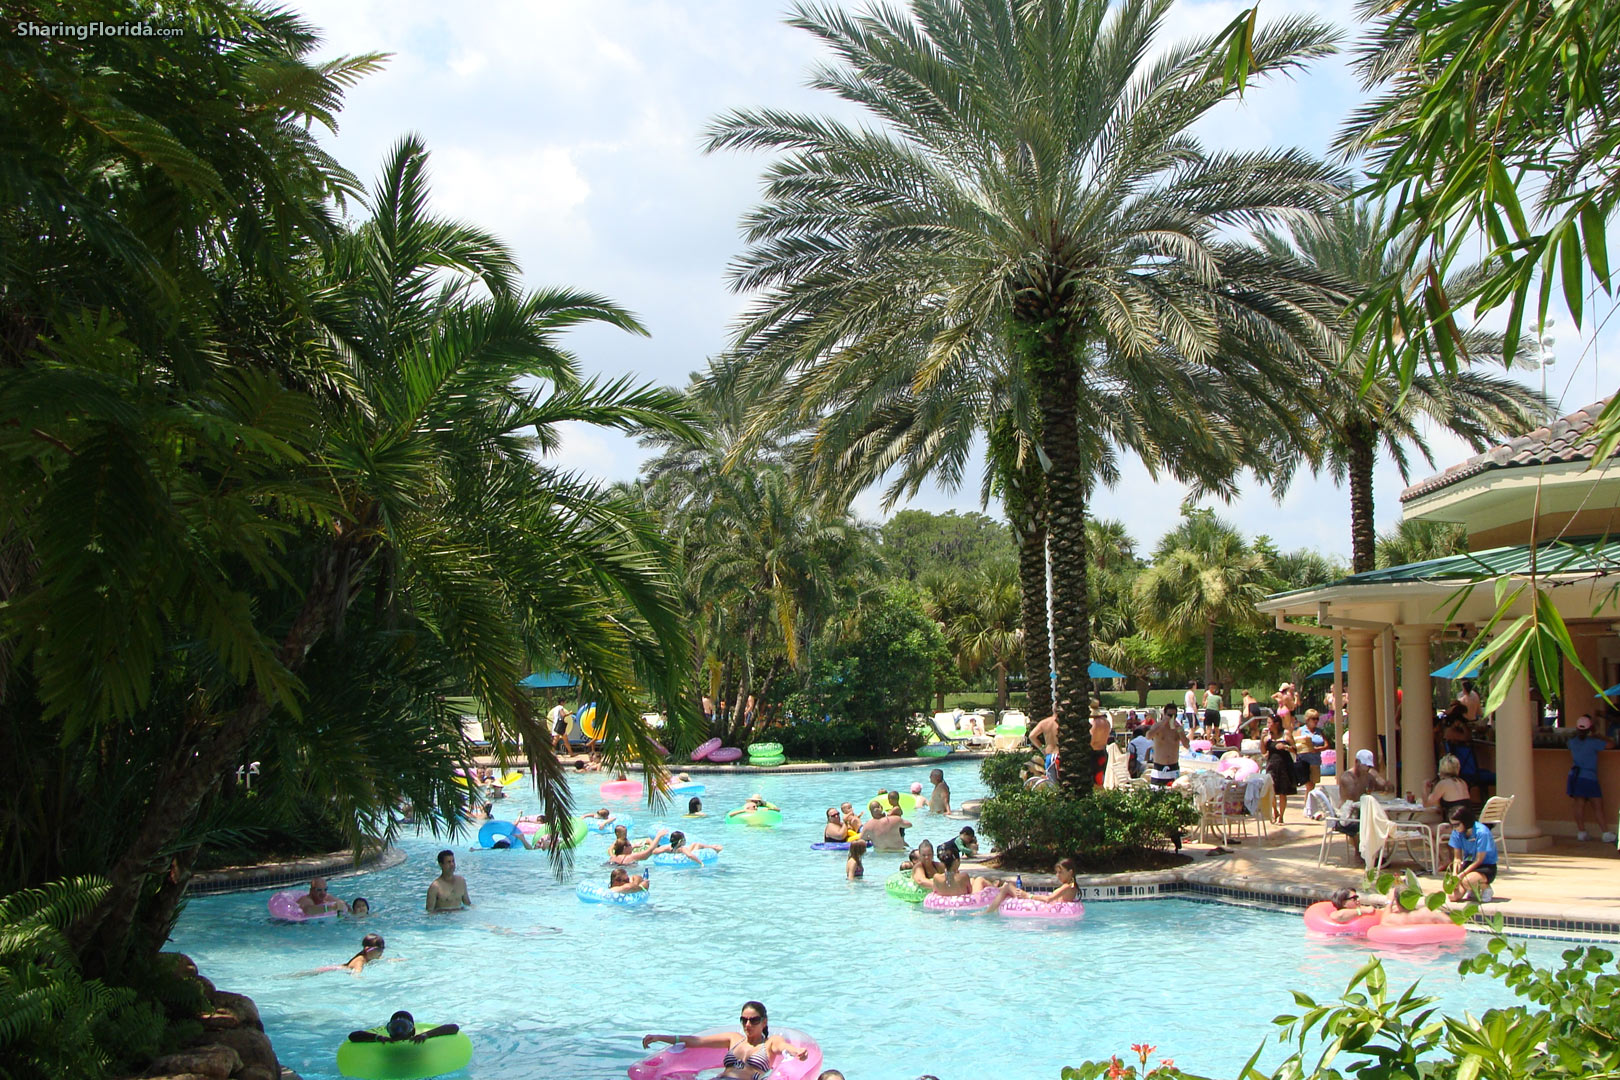 Florida Swimming Pool Wallpaper Lazy River From Orlando